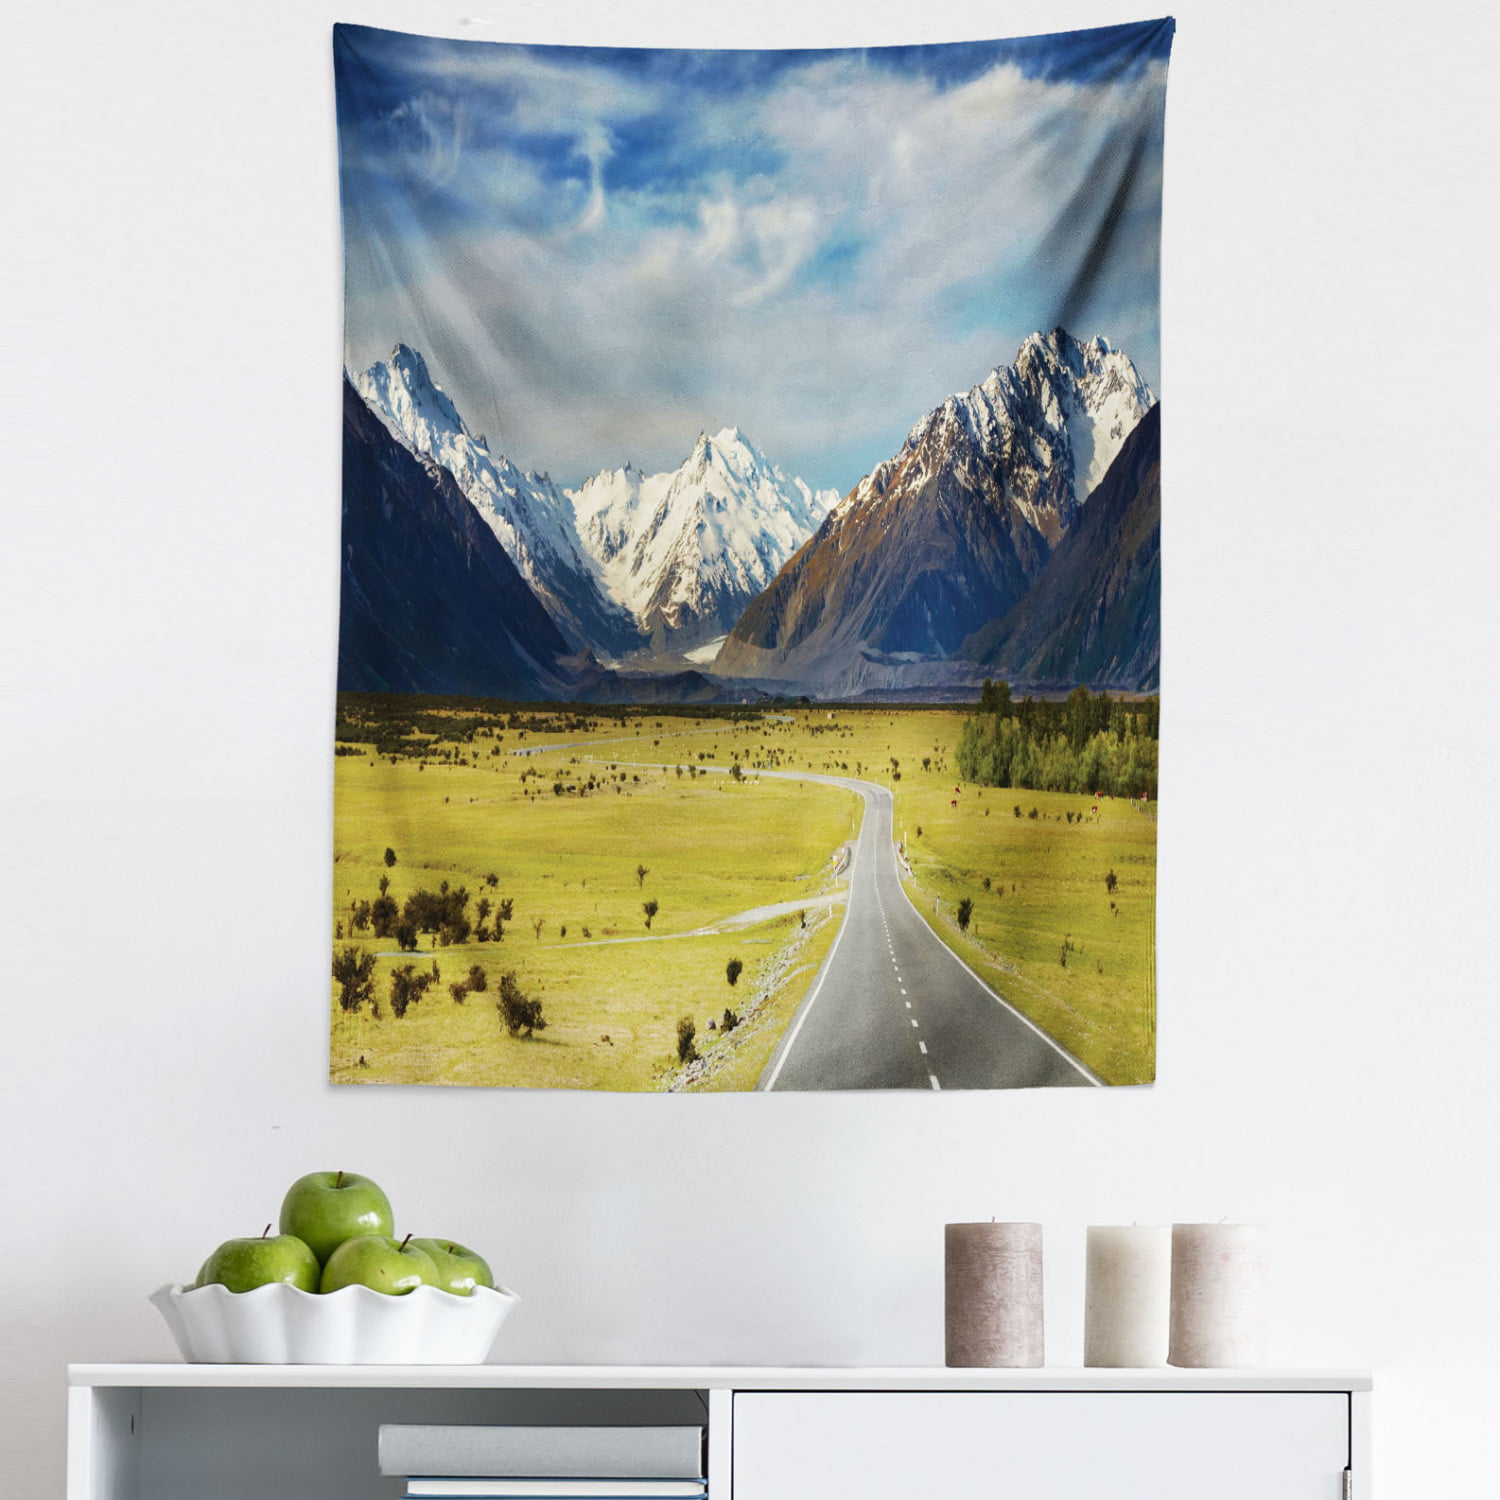 Ambesonne Mountain Tapestry, Landscape with Road and Snow Capped Mountains Southern Alps New Zealand, Wall Hanging for Bedroom Living Room Dorm Decor, - 1